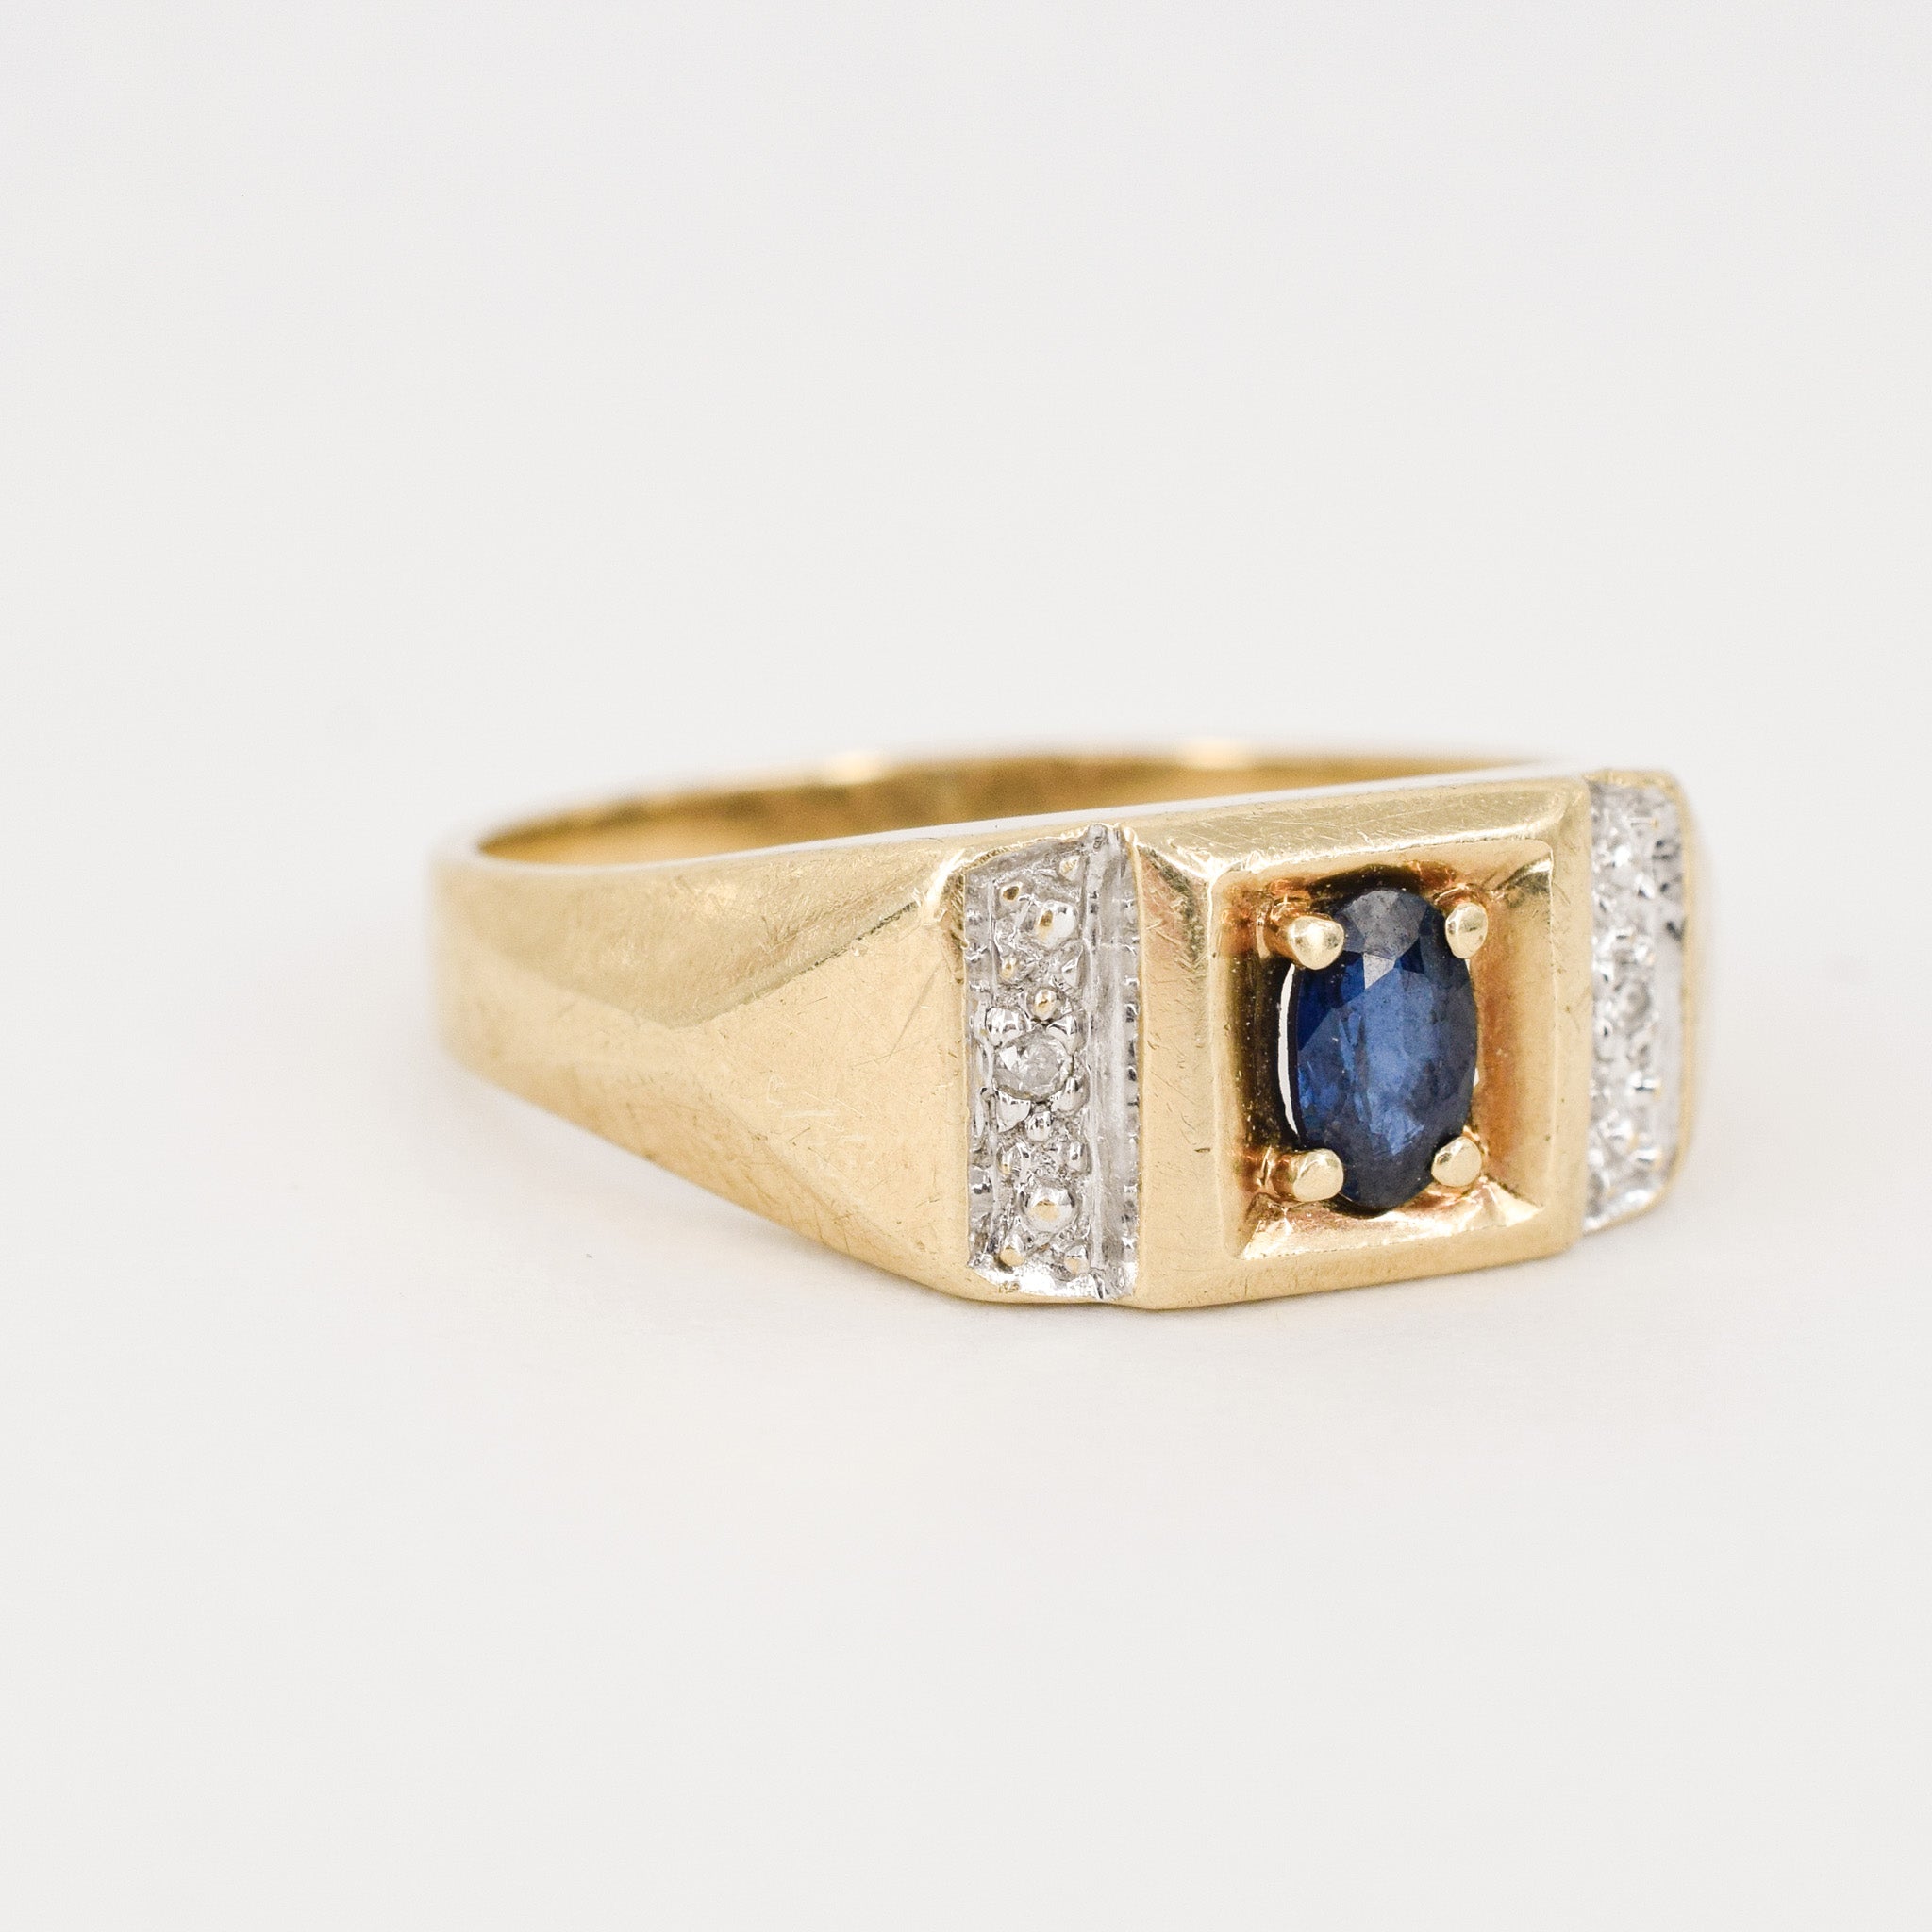 vintage gold sapphire signet ring with diamond accents, folklor vintage jewelry canada